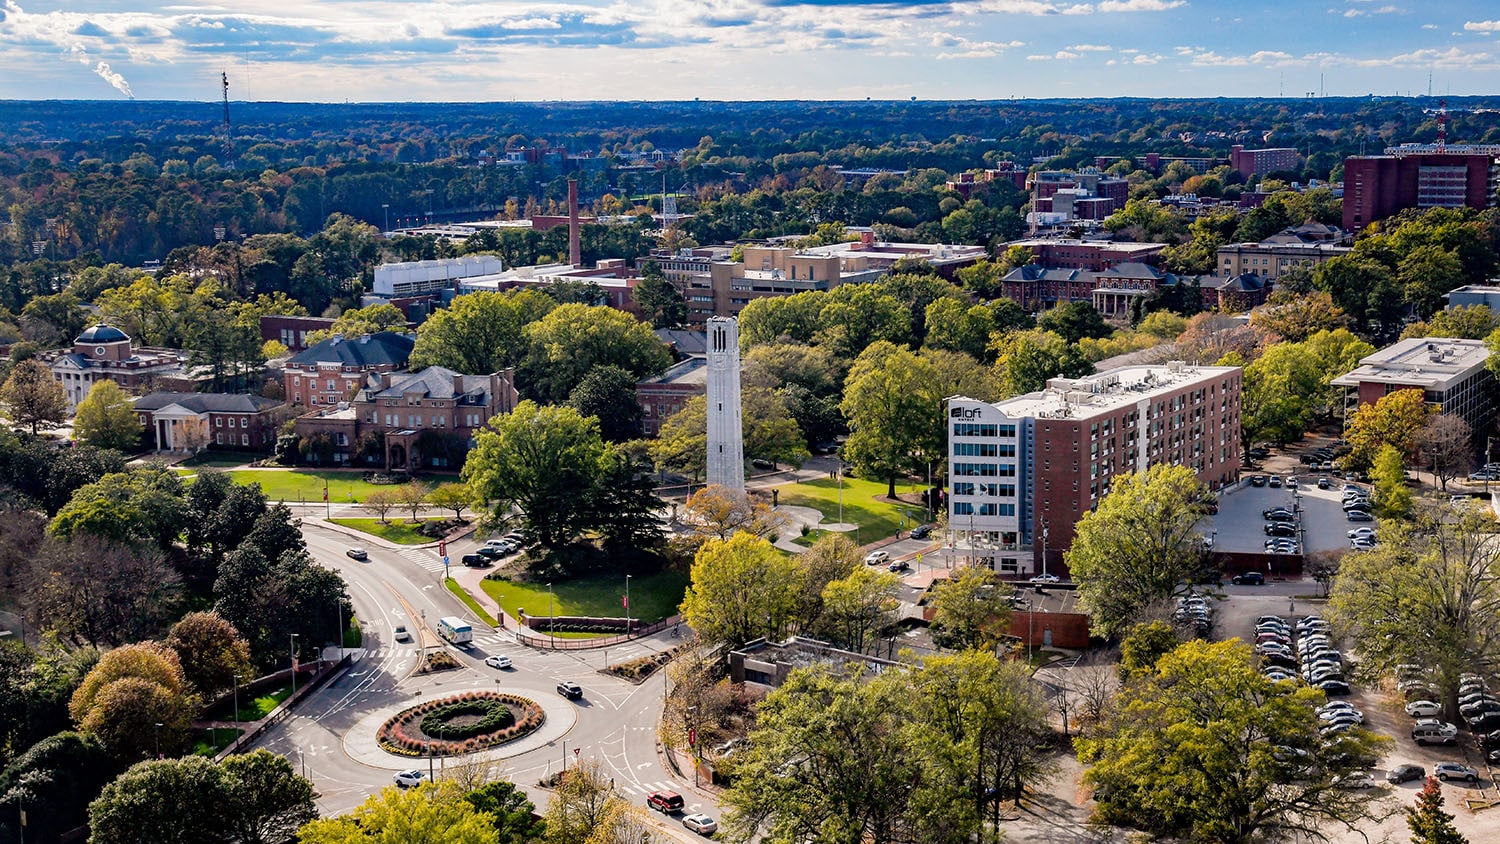 An aerial view of NC State's main campus, with the Memorial Belltower featured in the center foreground.